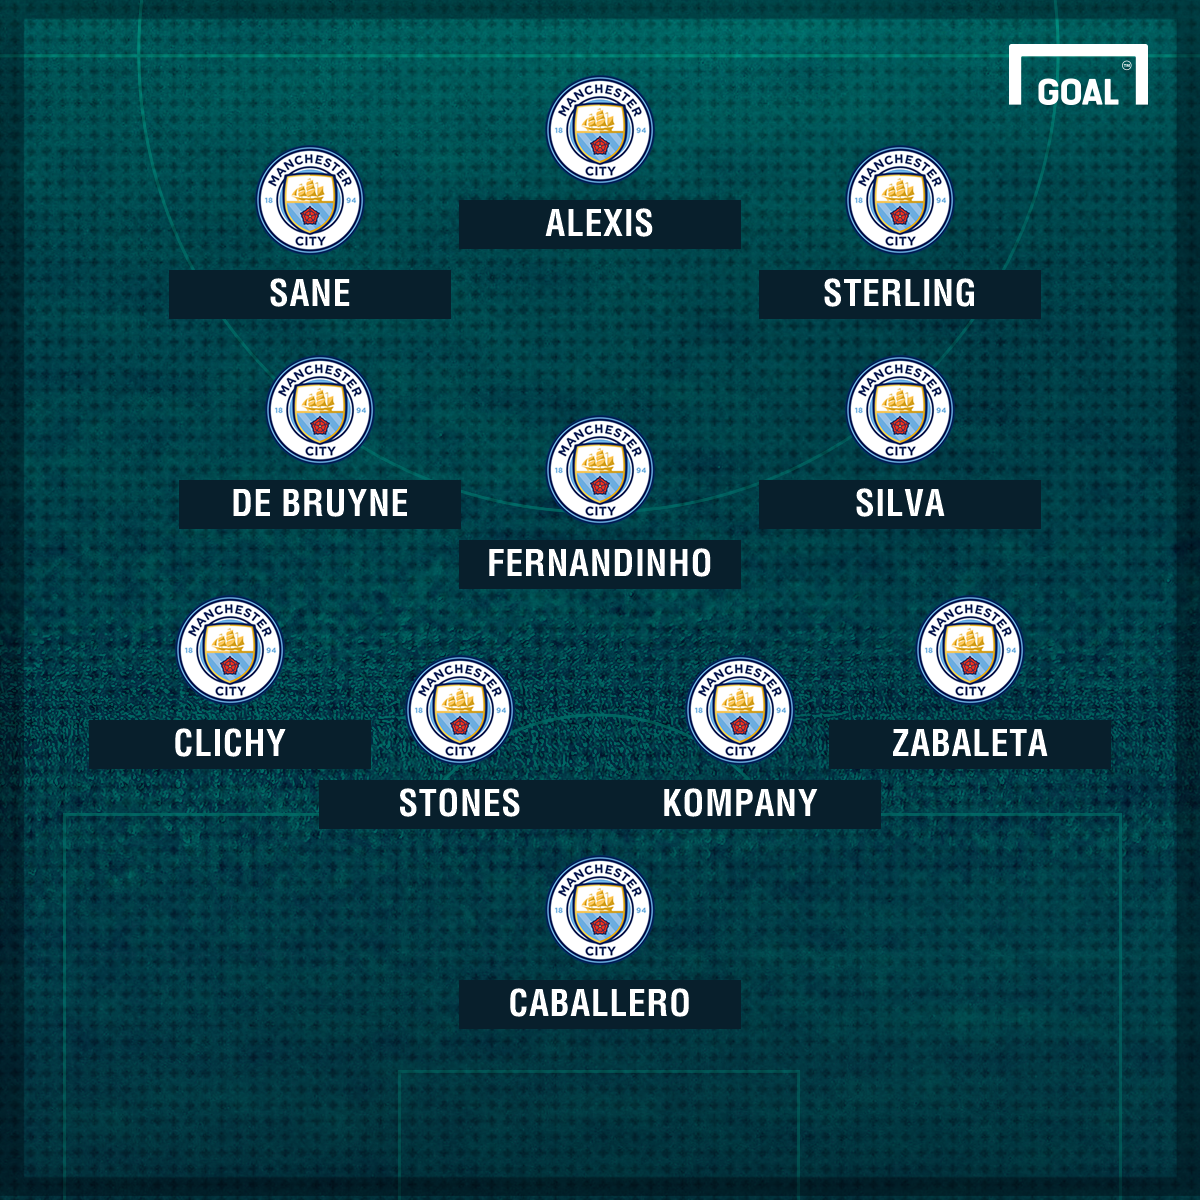 Man City line-up with Alexis